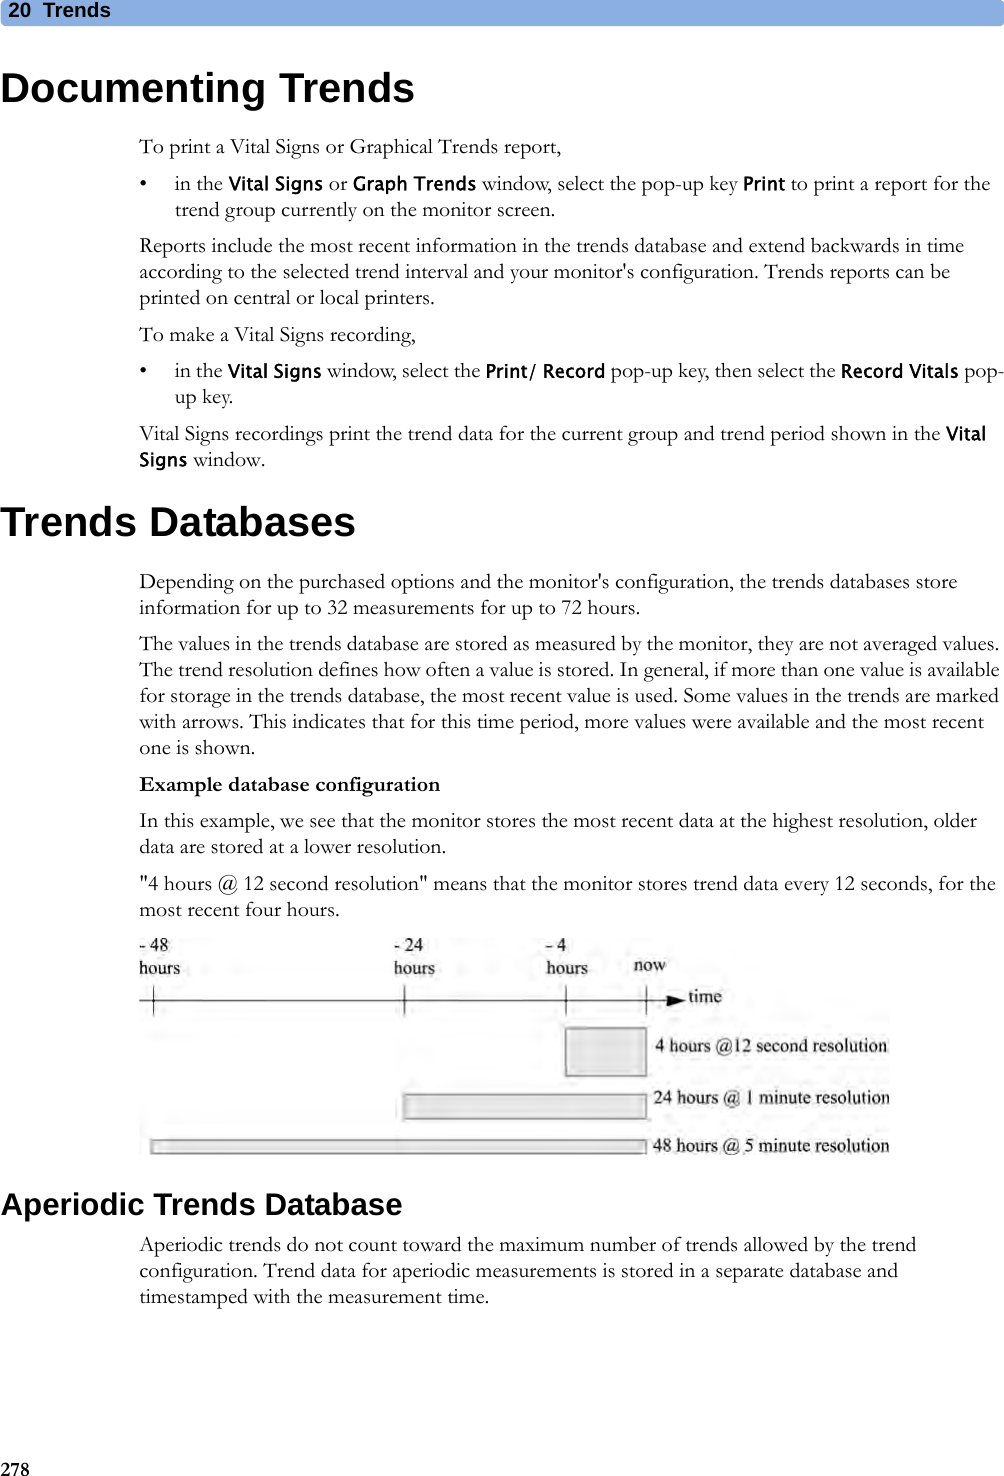 20 Trends278Documenting TrendsTo print a Vital Signs or Graphical Trends report,•in the Vital Signs or Graph Trends window, select the pop-up key Print to print a report for the trend group currently on the monitor screen. Reports include the most recent information in the trends database and extend backwards in time according to the selected trend interval and your monitor&apos;s configuration. Trends reports can be printed on central or local printers.To make a Vital Signs recording,•in the Vital Signs window, select the Print/ Record pop-up key, then select the Record Vitals pop-up key.Vital Signs recordings print the trend data for the current group and trend period shown in the Vital Signs window.Trends DatabasesDepending on the purchased options and the monitor&apos;s configuration, the trends databases store information for up to 32 measurements for up to 72 hours.The values in the trends database are stored as measured by the monitor, they are not averaged values. The trend resolution defines how often a value is stored. In general, if more than one value is available for storage in the trends database, the most recent value is used. Some values in the trends are marked with arrows. This indicates that for this time period, more values were available and the most recent one is shown.Example database configurationIn this example, we see that the monitor stores the most recent data at the highest resolution, older data are stored at a lower resolution.&quot;4 hours @ 12 second resolution&quot; means that the monitor stores trend data every 12 seconds, for the most recent four hours.Aperiodic Trends DatabaseAperiodic trends do not count toward the maximum number of trends allowed by the trend configuration. Trend data for aperiodic measurements is stored in a separate database and timestamped with the measurement time.